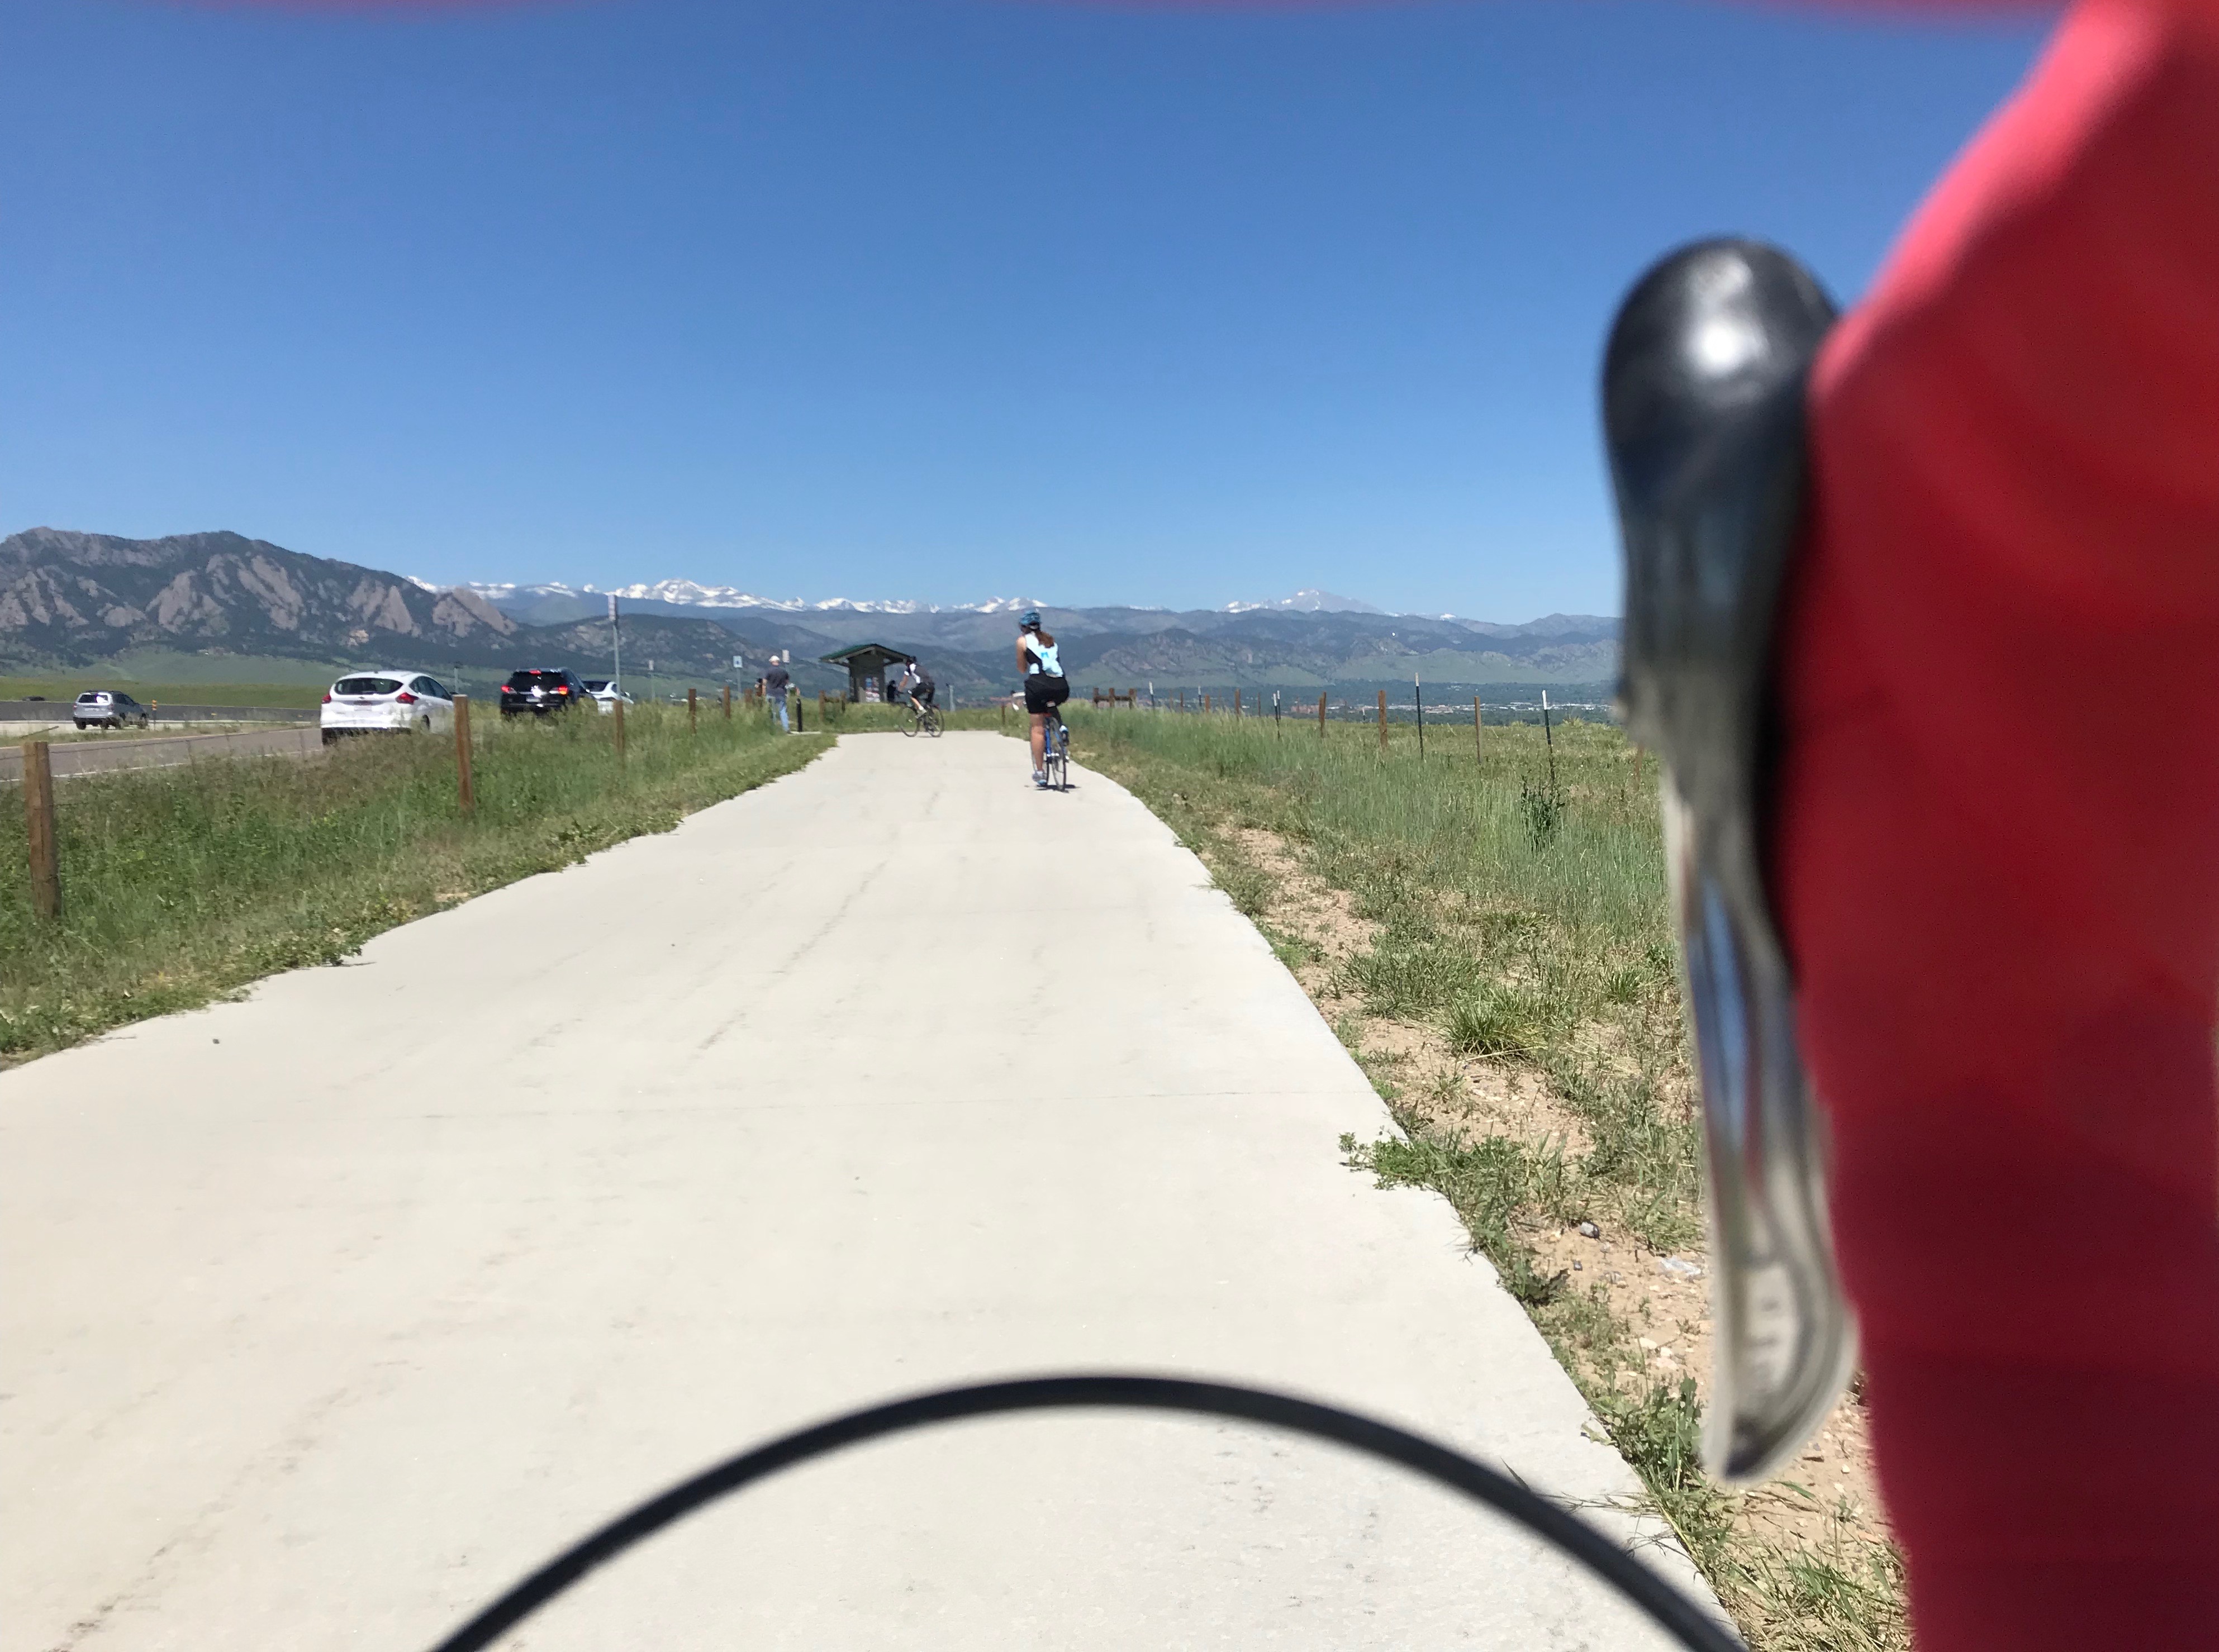 The front range behind Boulder with bike handlebars in the foreground to the right